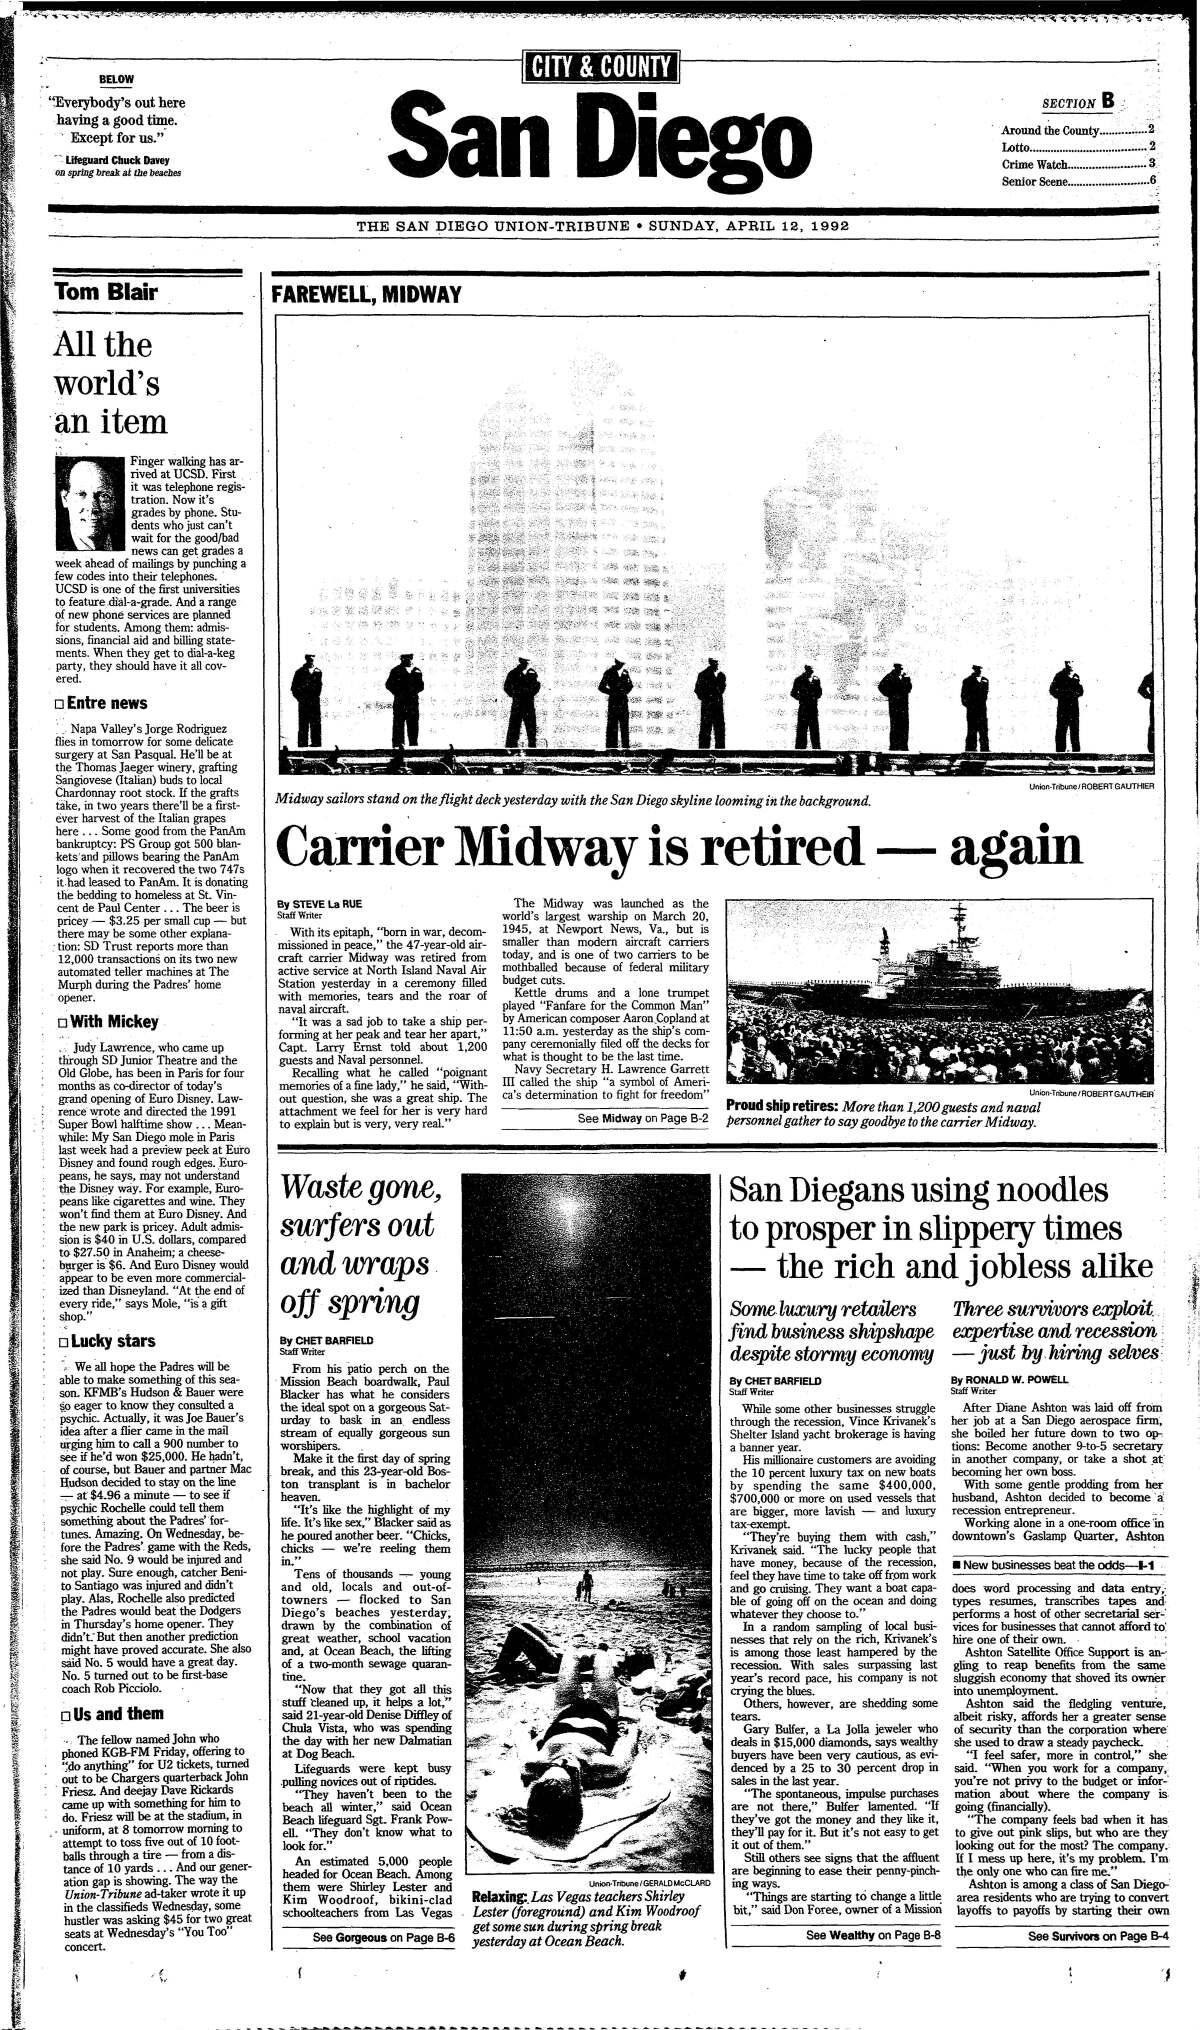 Front page of The San Diego Union-Tribune's April 12, 1992 local section.